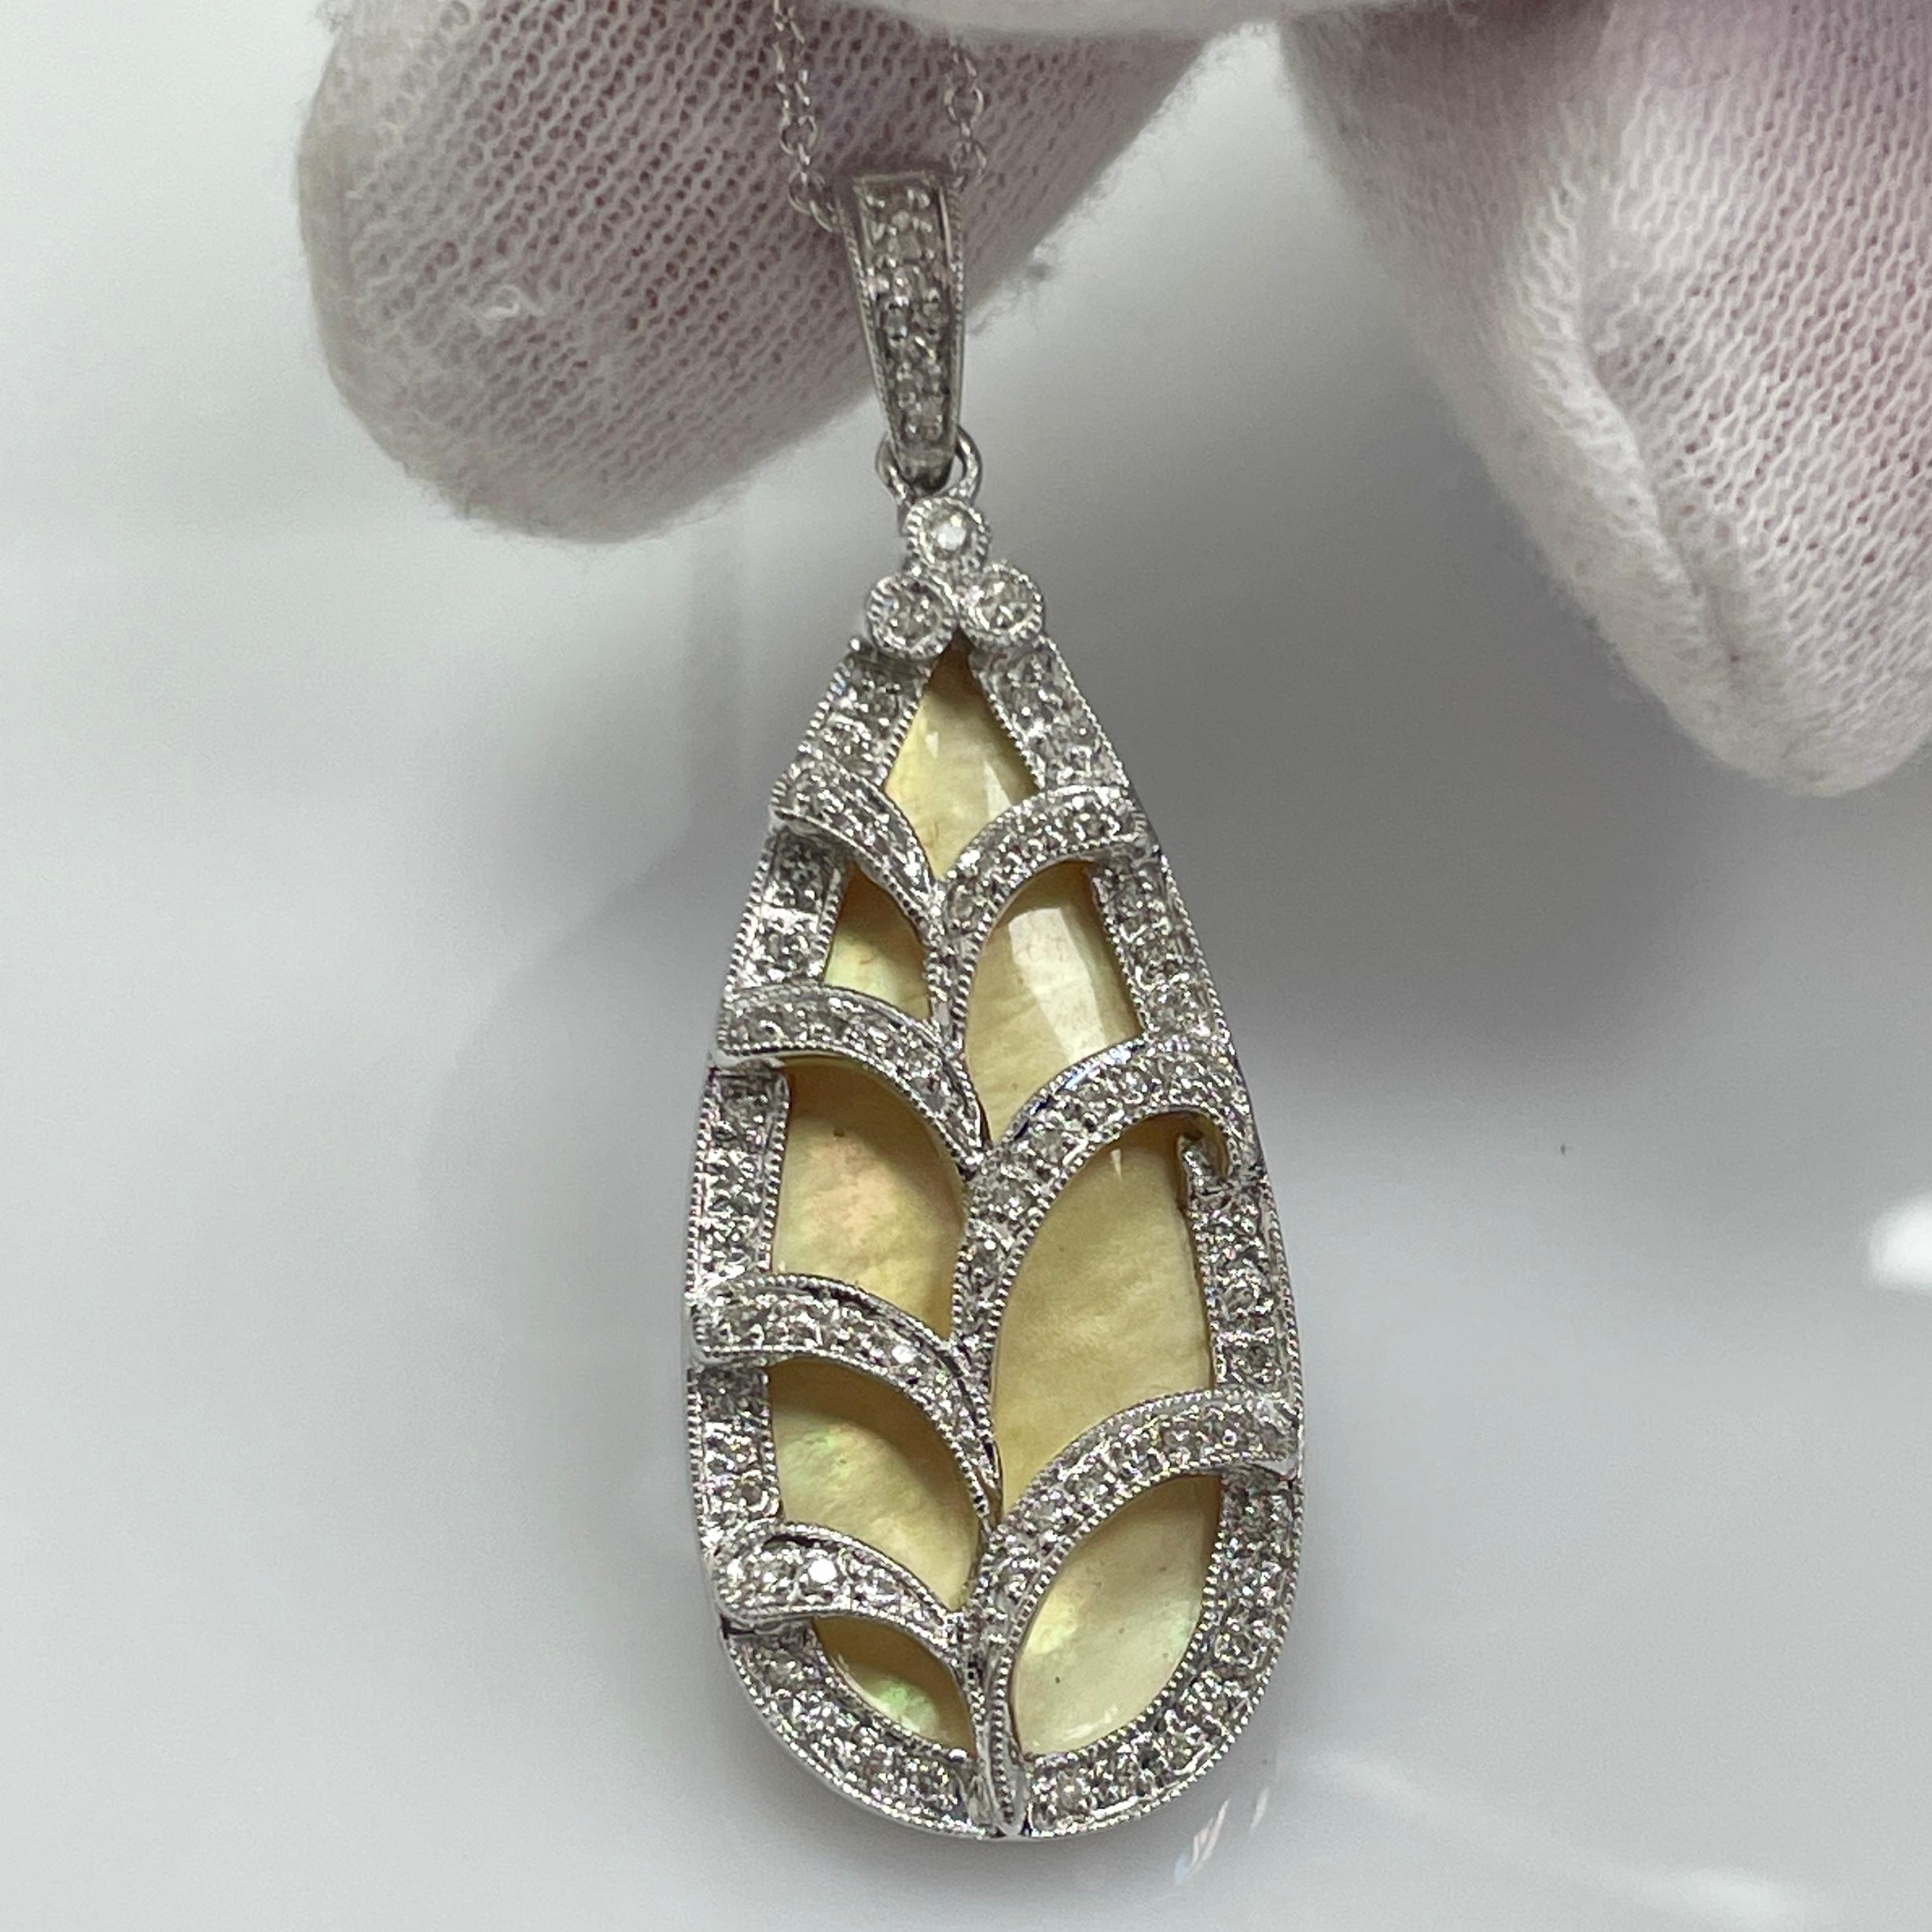 A lively white pear shape opal 18K white gold pendant with .30Ct of brilliant white diamonds.